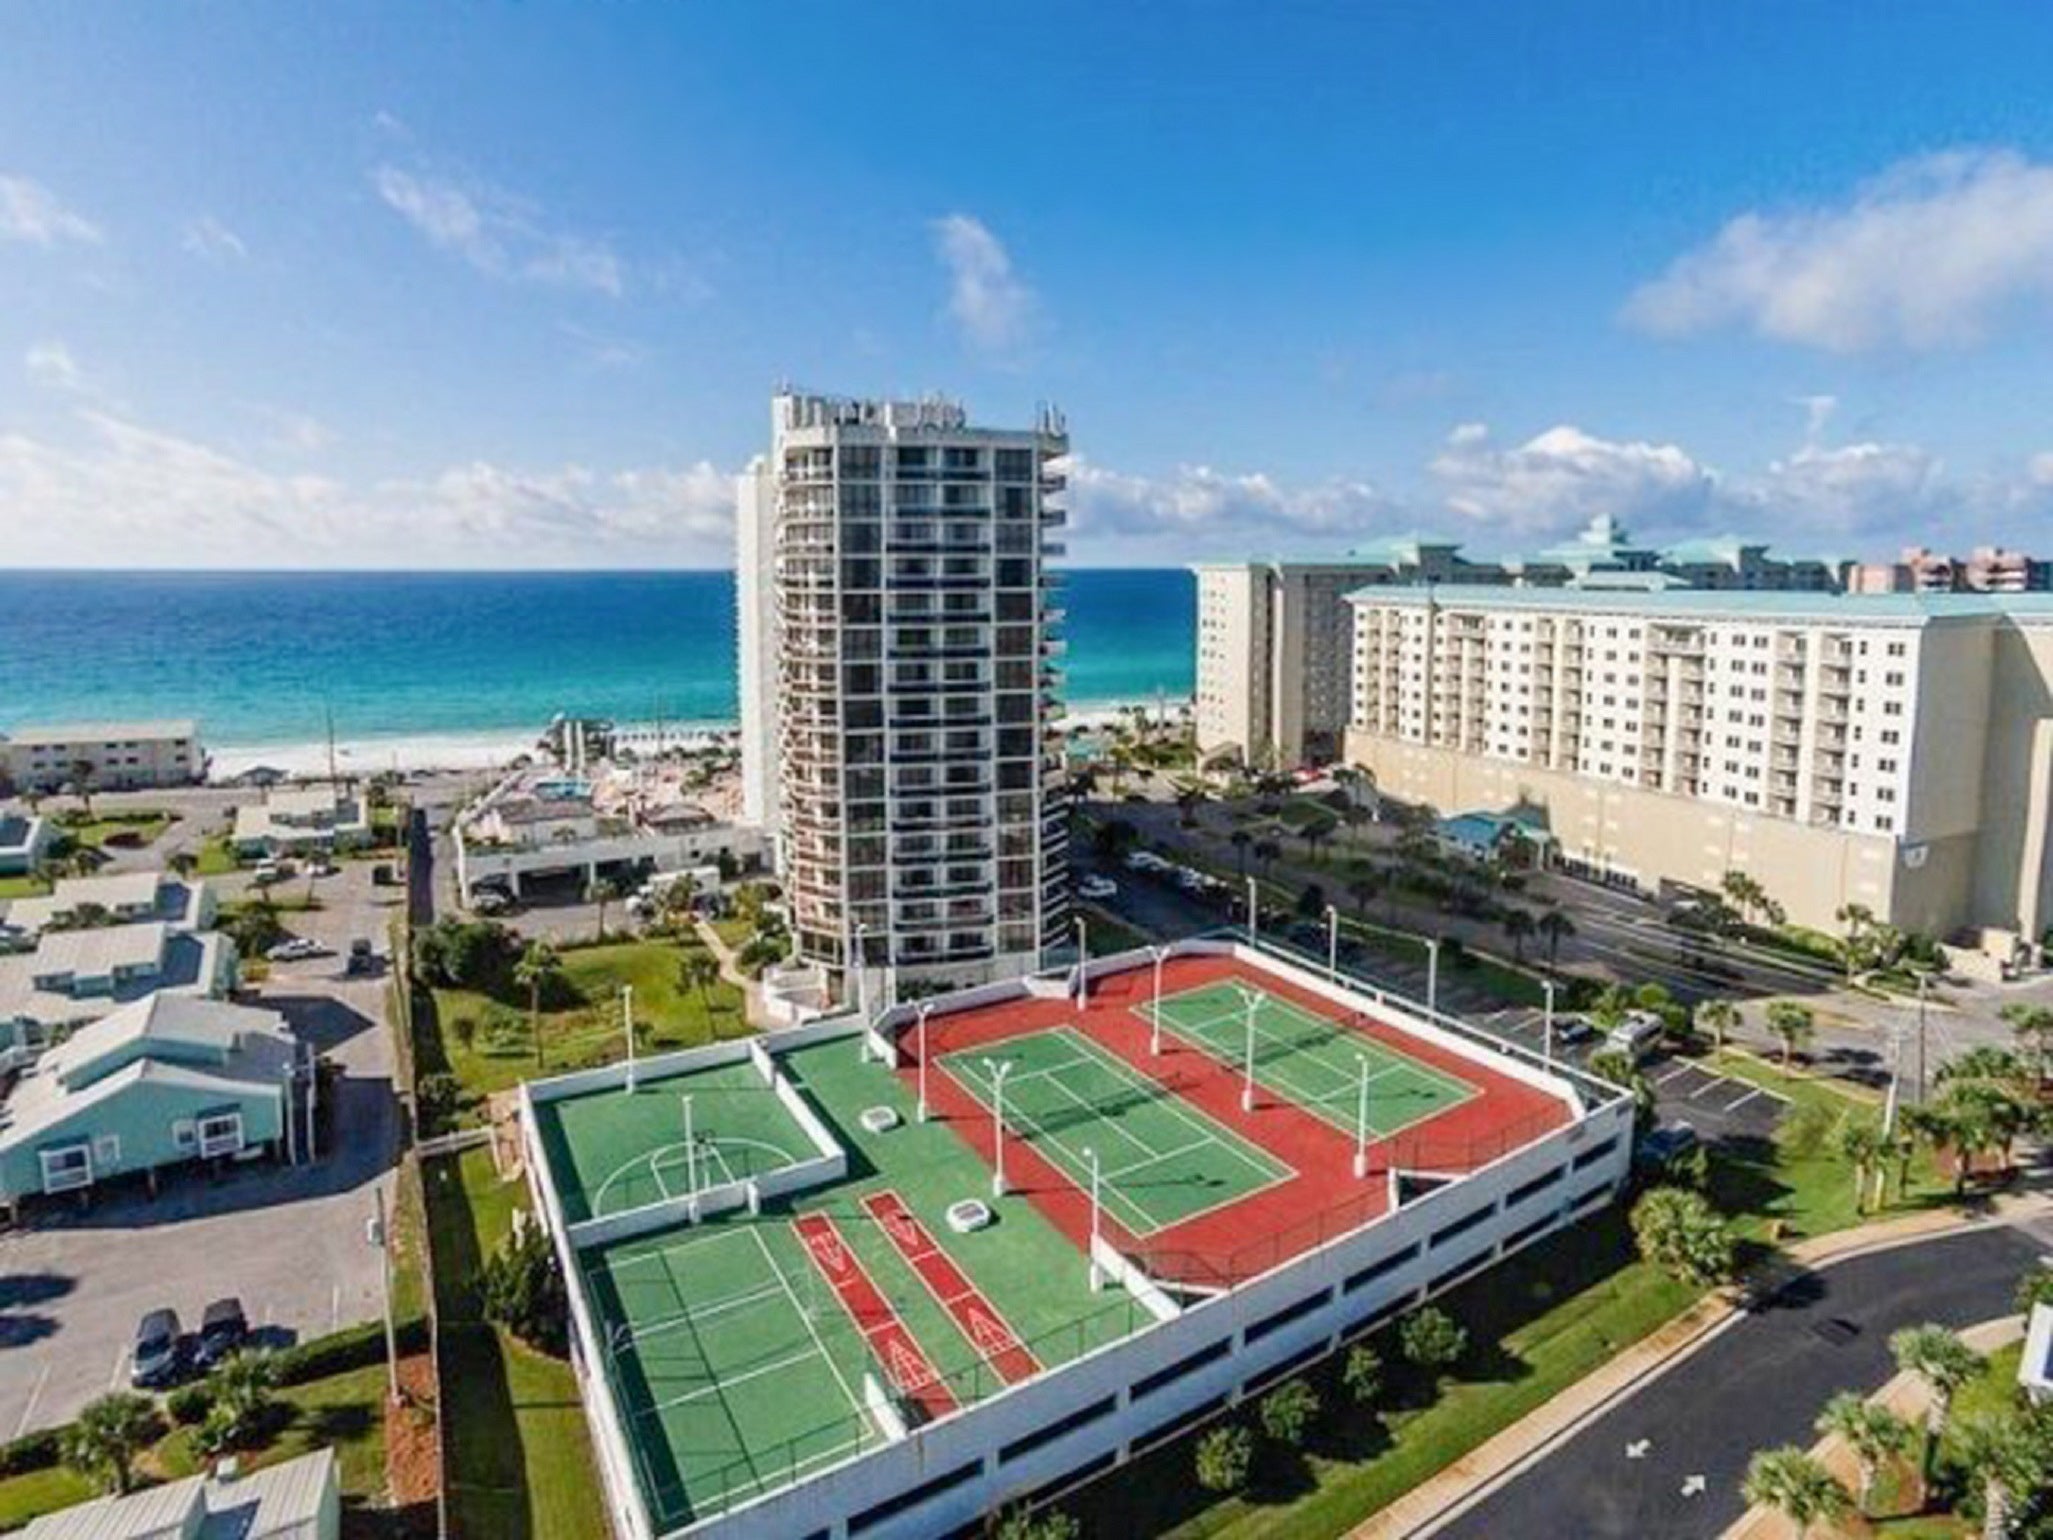 Tennis Courts at Surfside